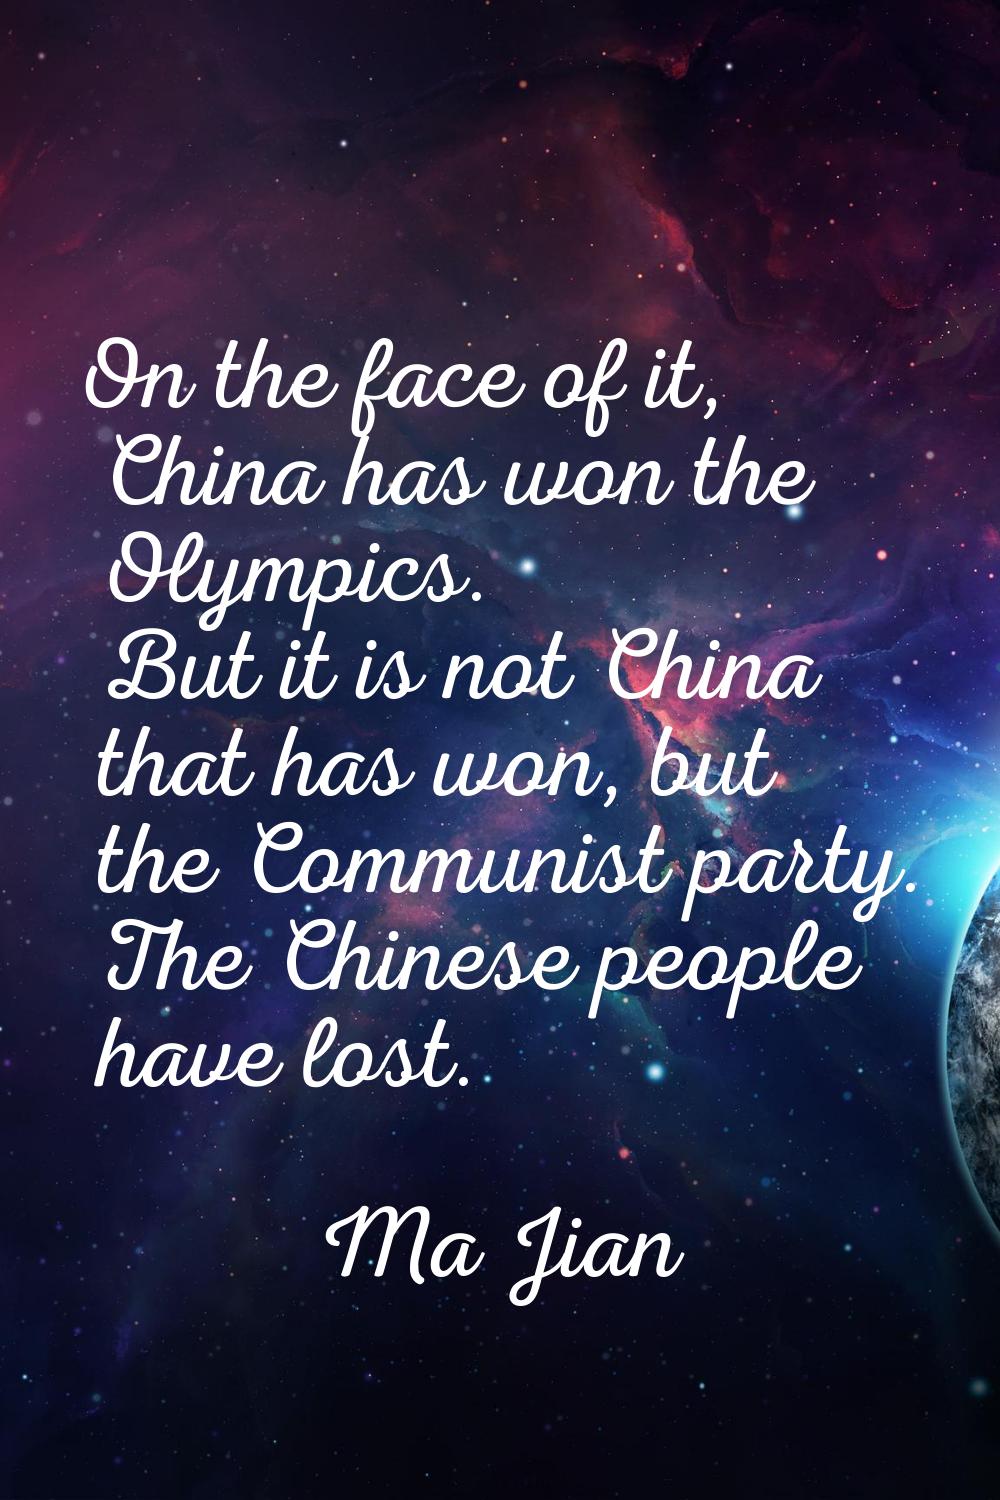 On the face of it, China has won the Olympics. But it is not China that has won, but the Communist 